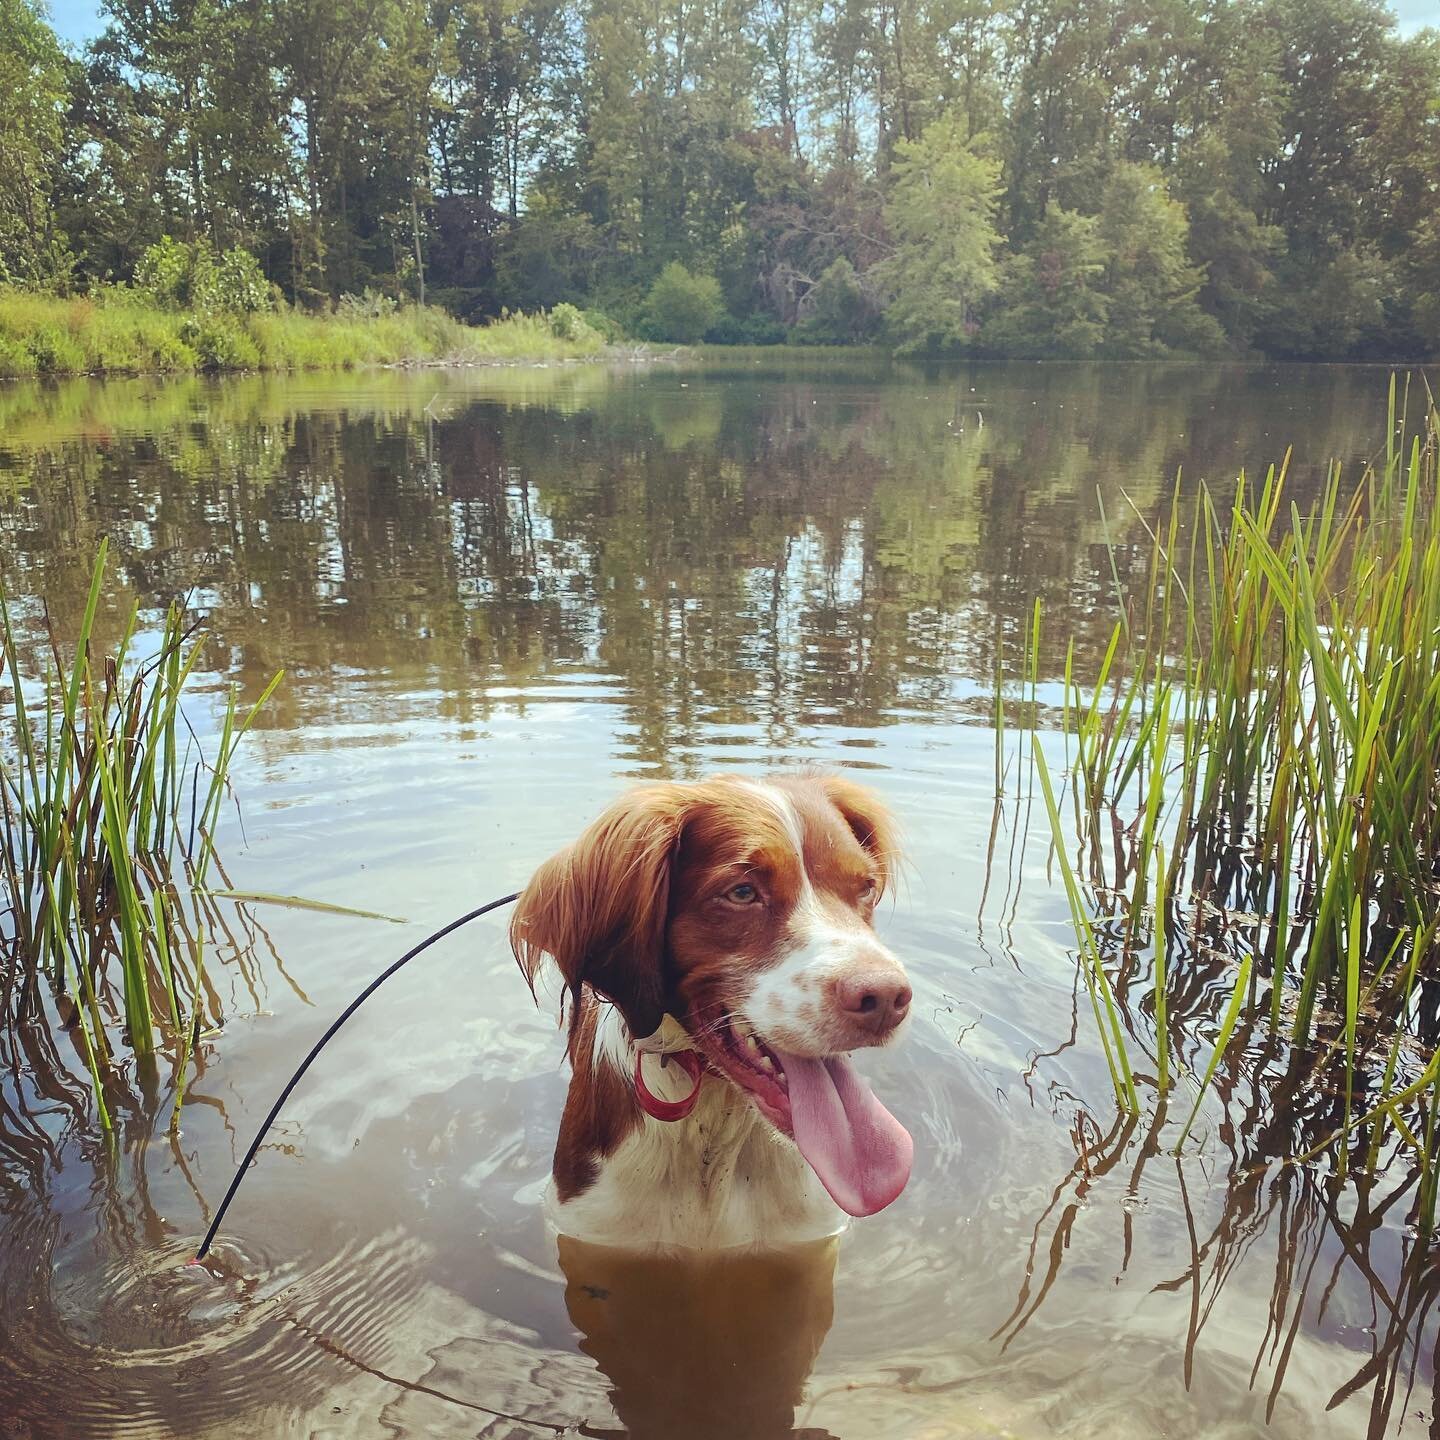 &ldquo;Yeah, Dad, I&rsquo;ve got the water retrieve down cold, but sure, let&rsquo;s do it 80 more times before dove opens next month &hellip;&rdquo; #dogdaysofsummer #august #whatsitgoodfor #dog #brittany #americanbrittany #virginiabrittany #brittan